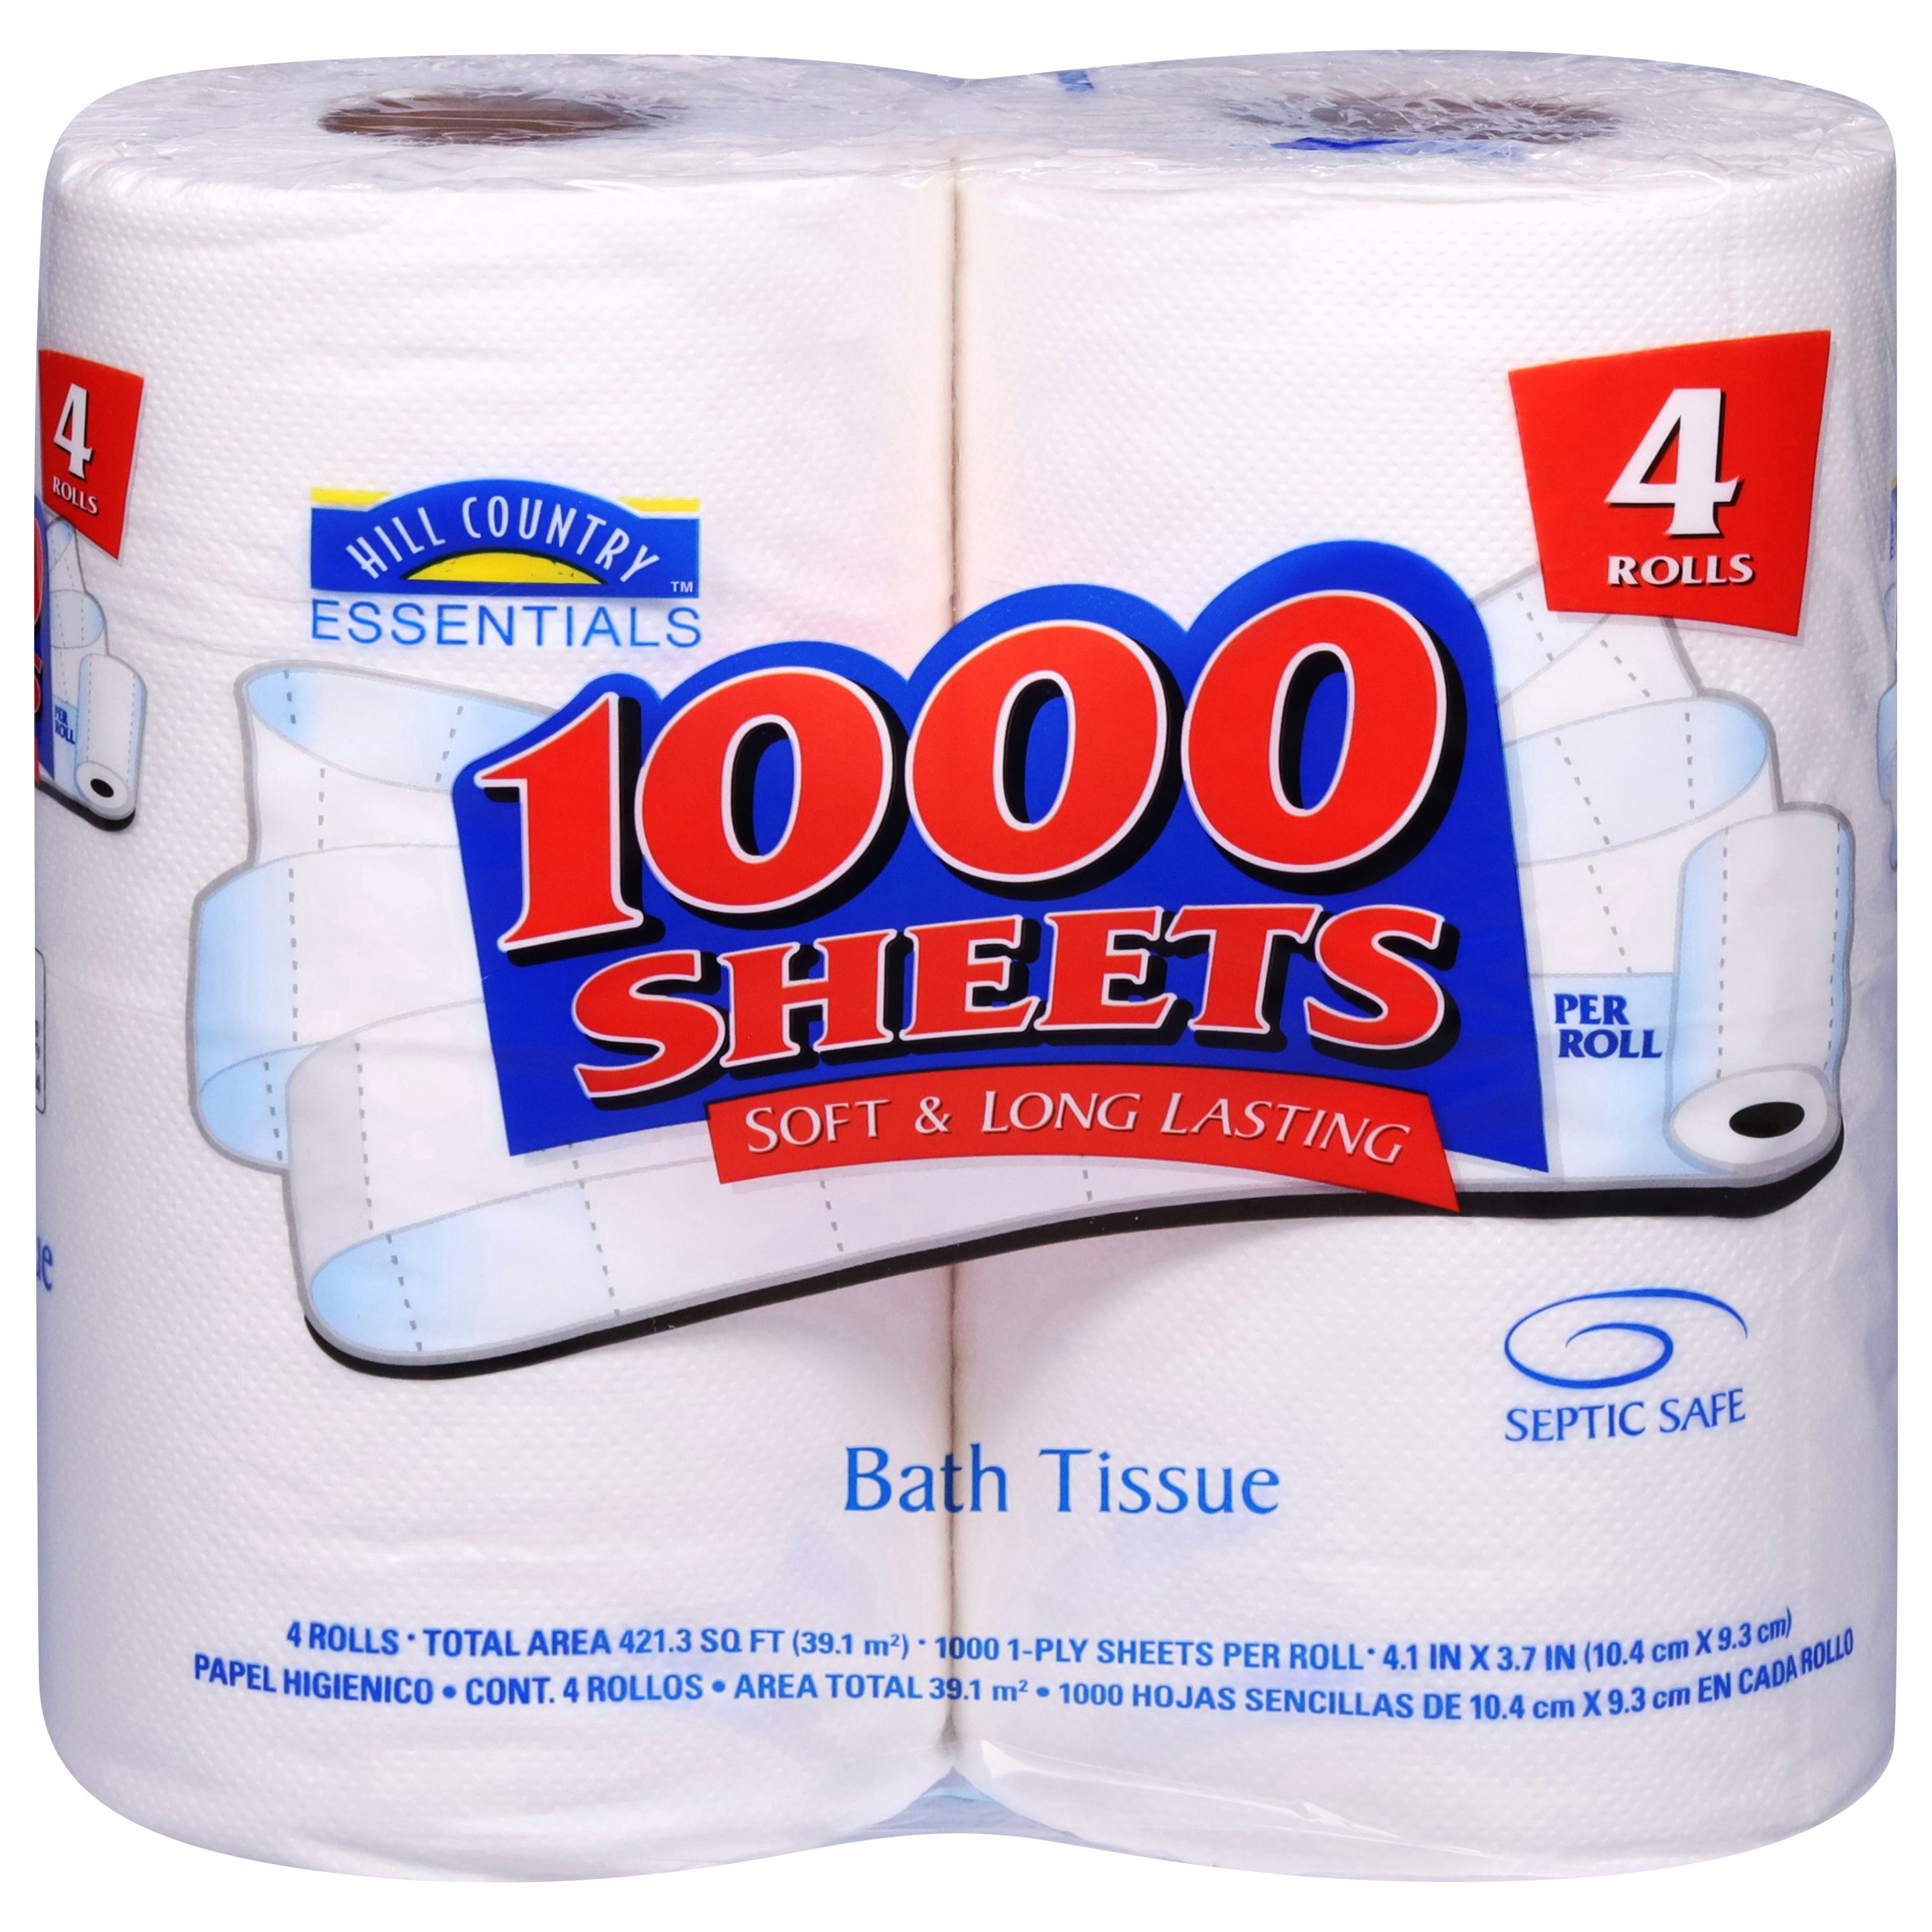 Hill Country Essentials 1000 Sheets Soft Toilet Paper - Shop Toilet Paper  at H-E-B